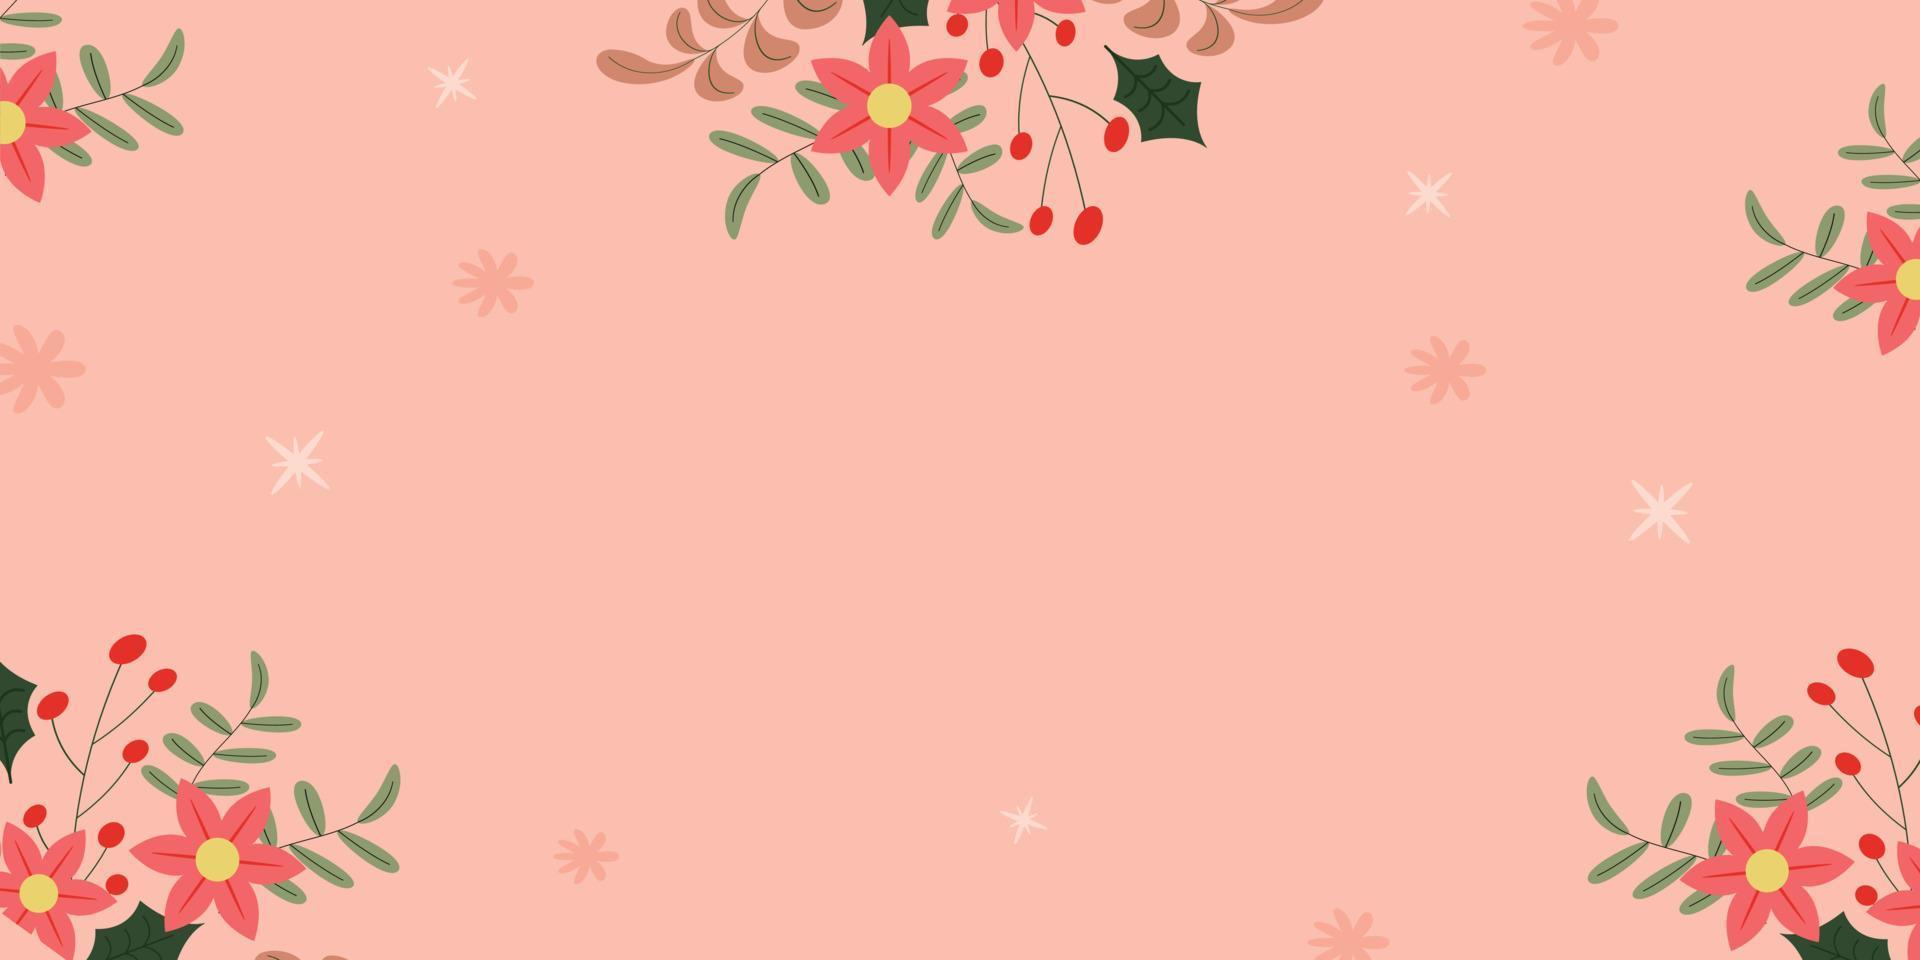 Christmas and Template Background vector